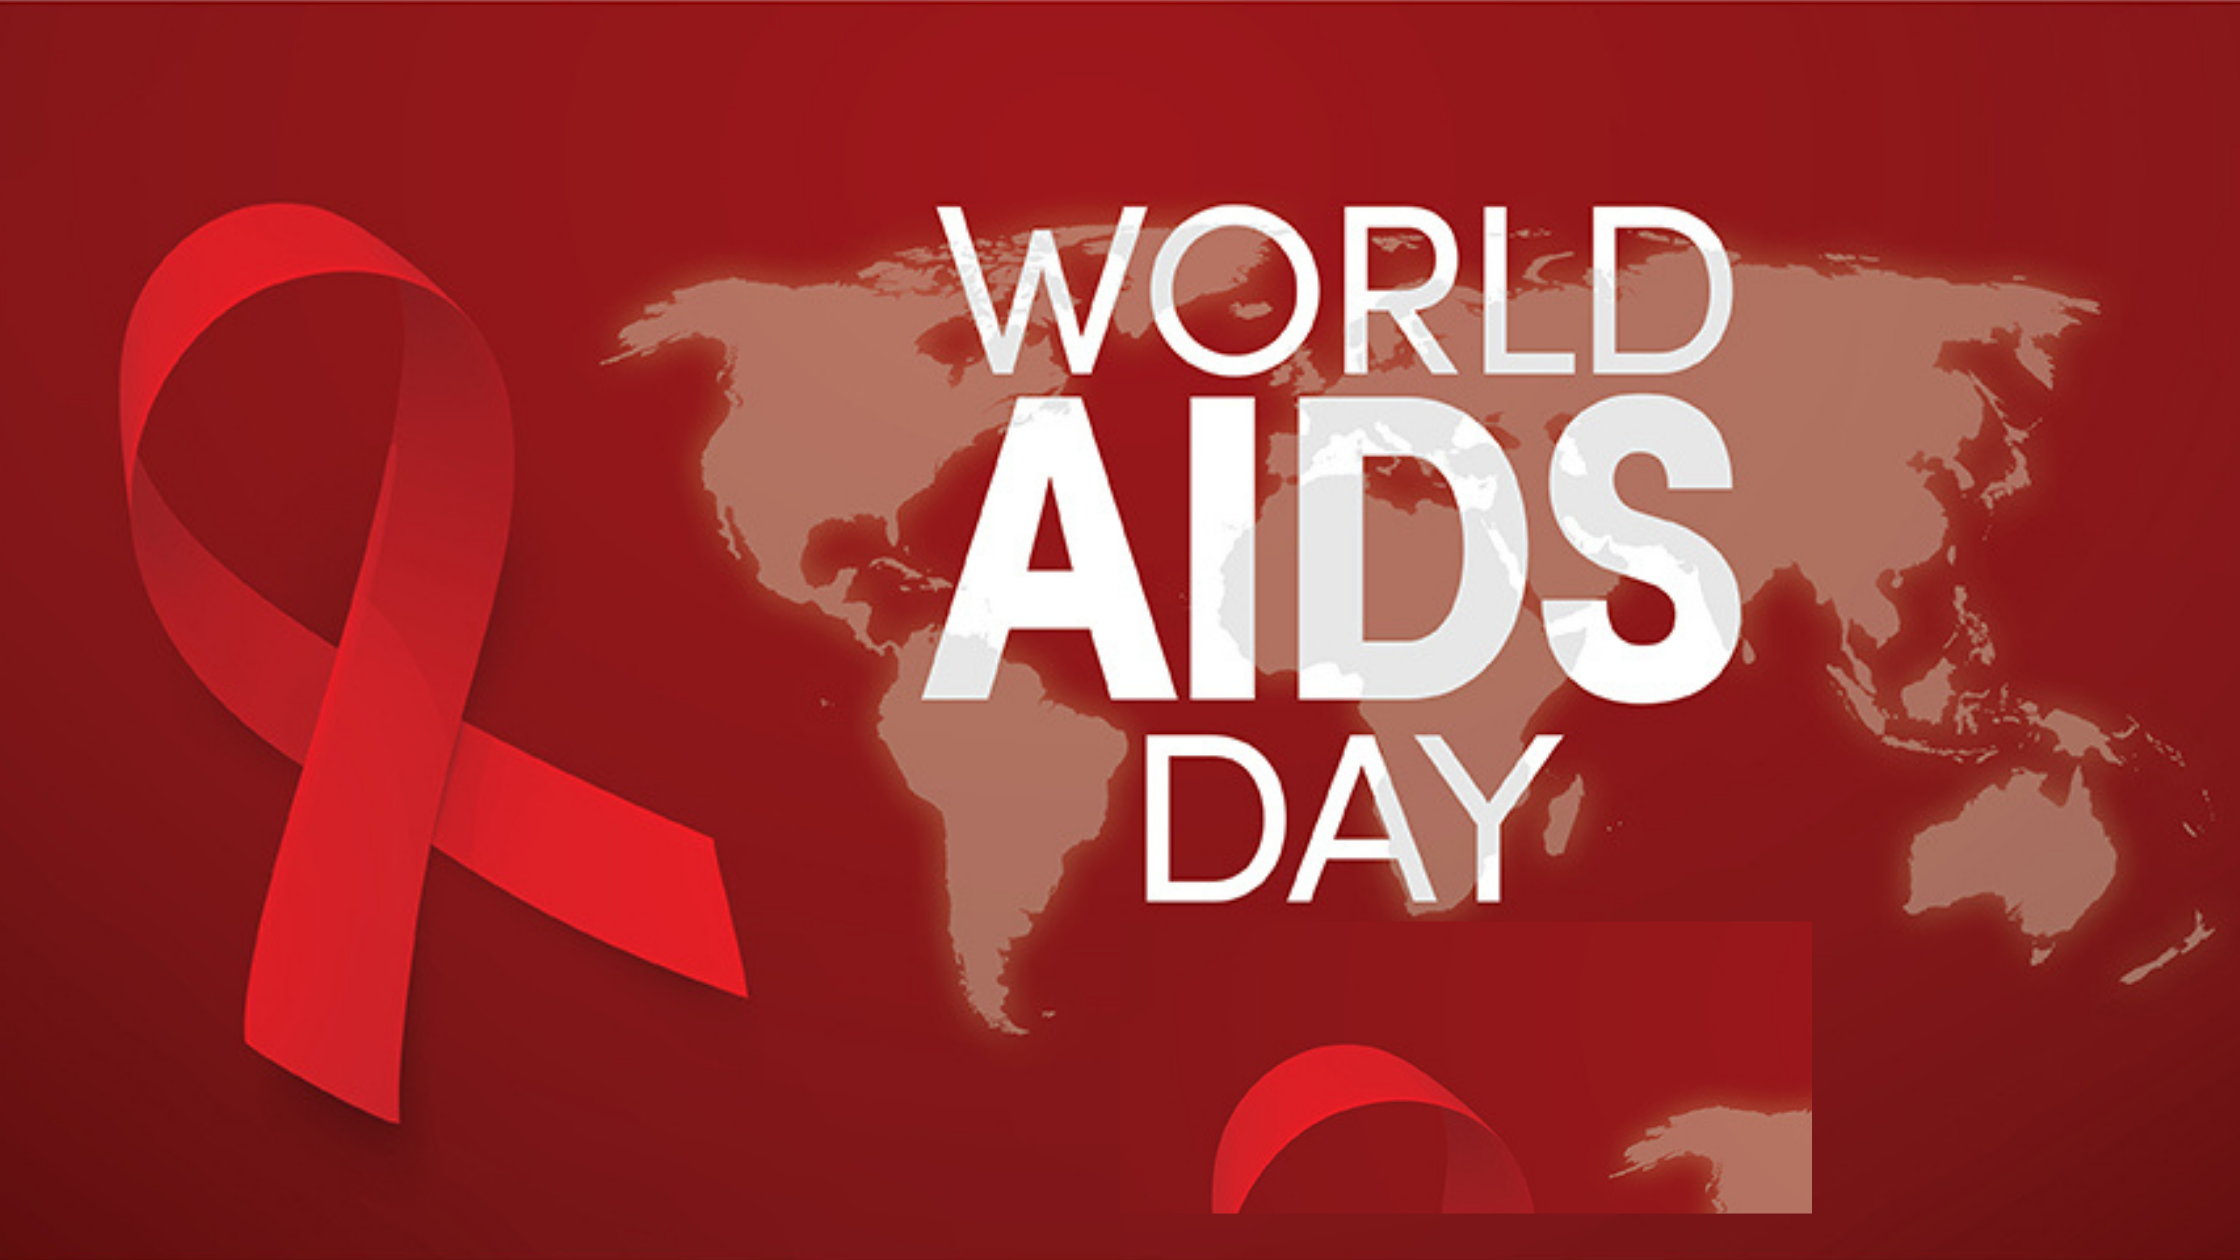 WHAT IS WORLD AIDS DAY?